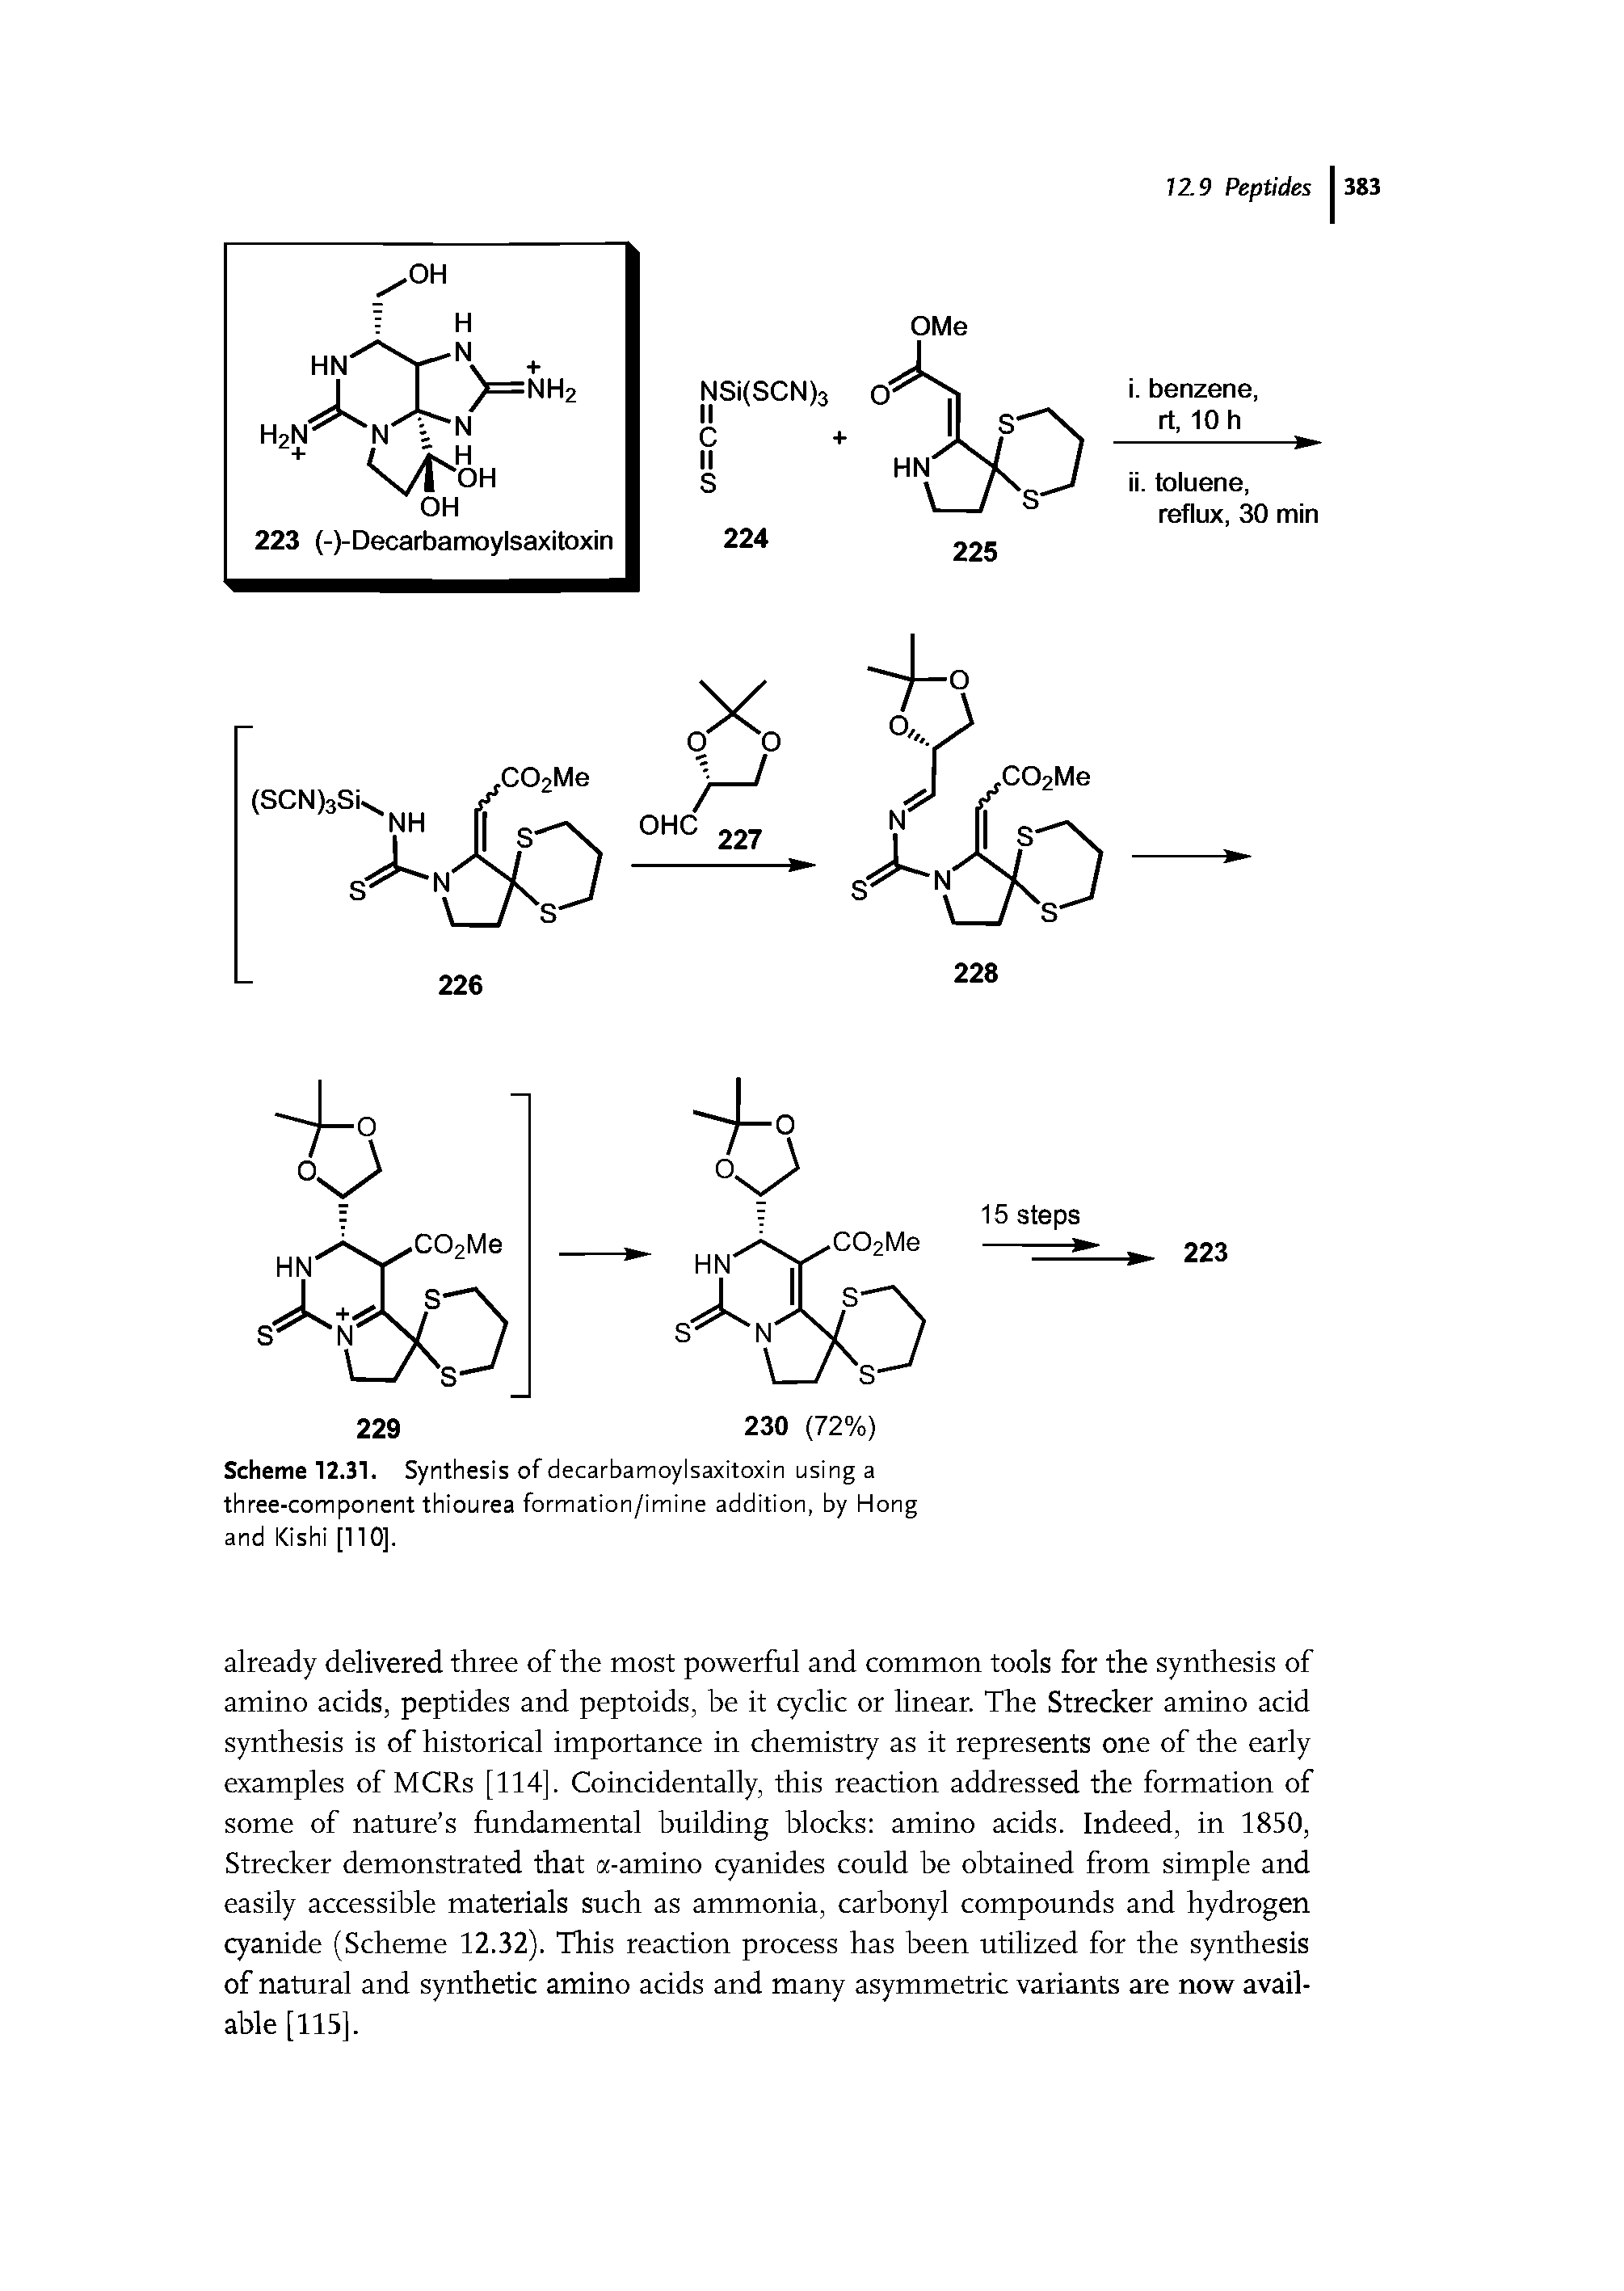 Scheme 12.31. Synthesis of decarbamoylsaxitoxin using a three-component thiourea formation/imine addition, by Hong and Kishi [110].